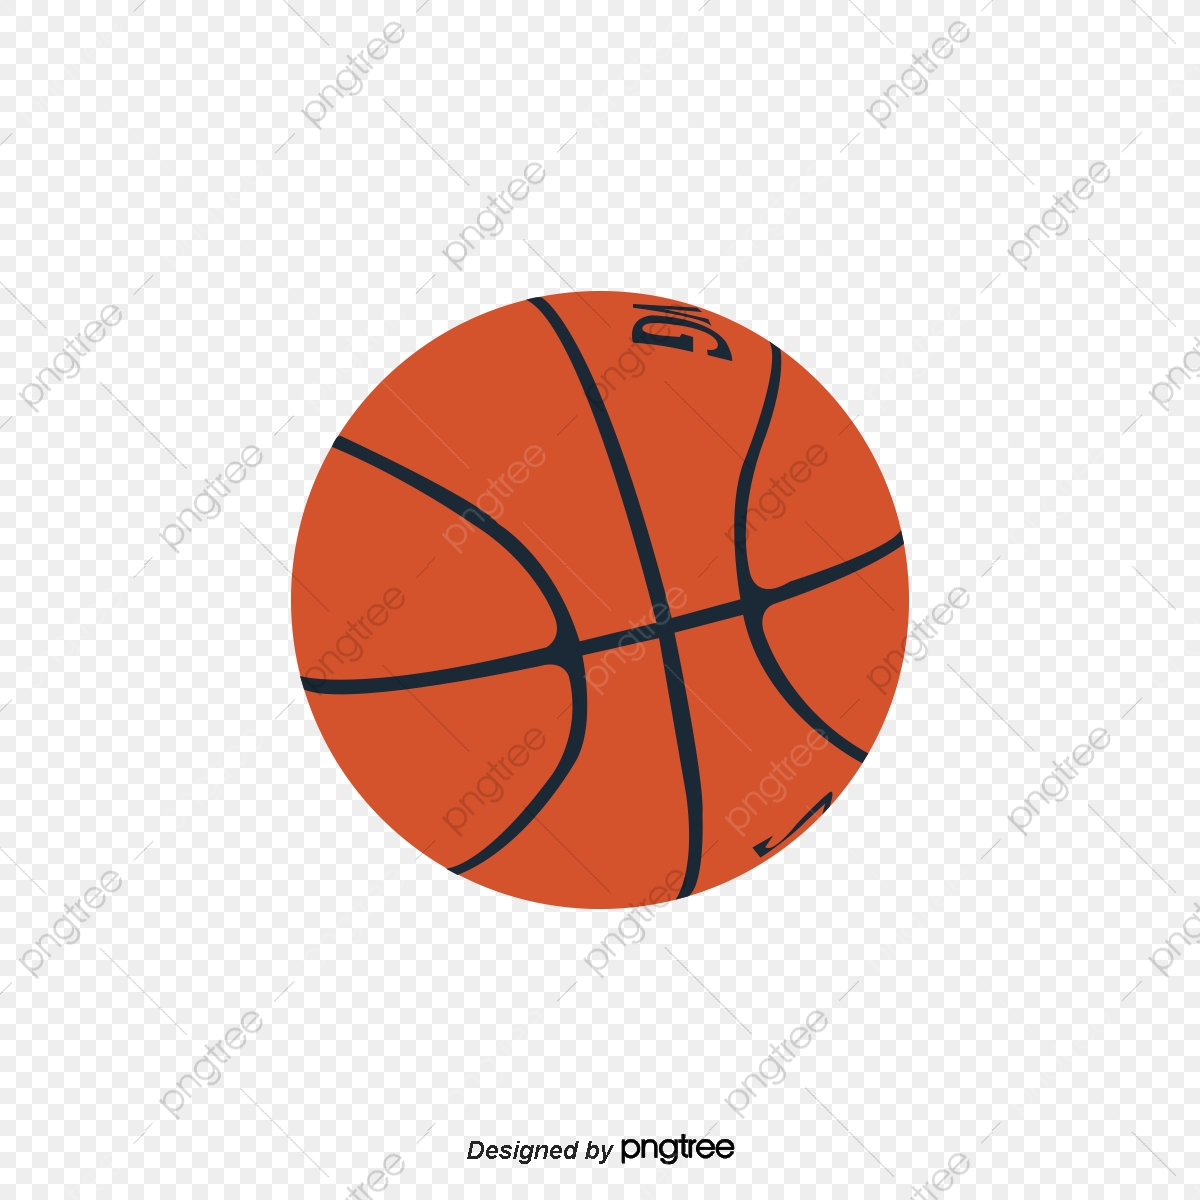 Clipart basketball file. Ball png transparent 